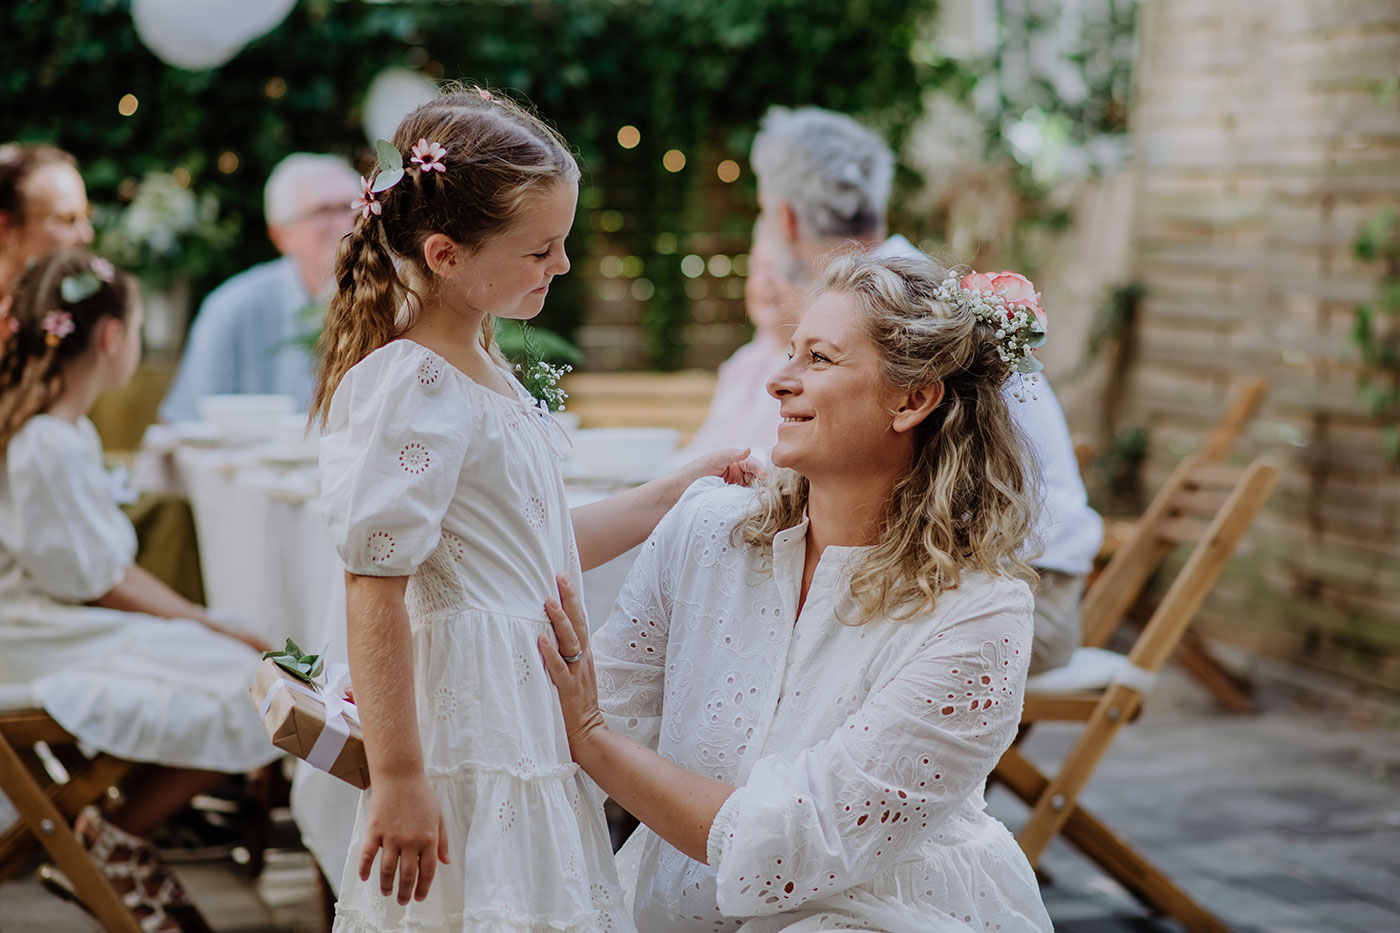 Kids at Weddings: How to Make It a Memorable Experience